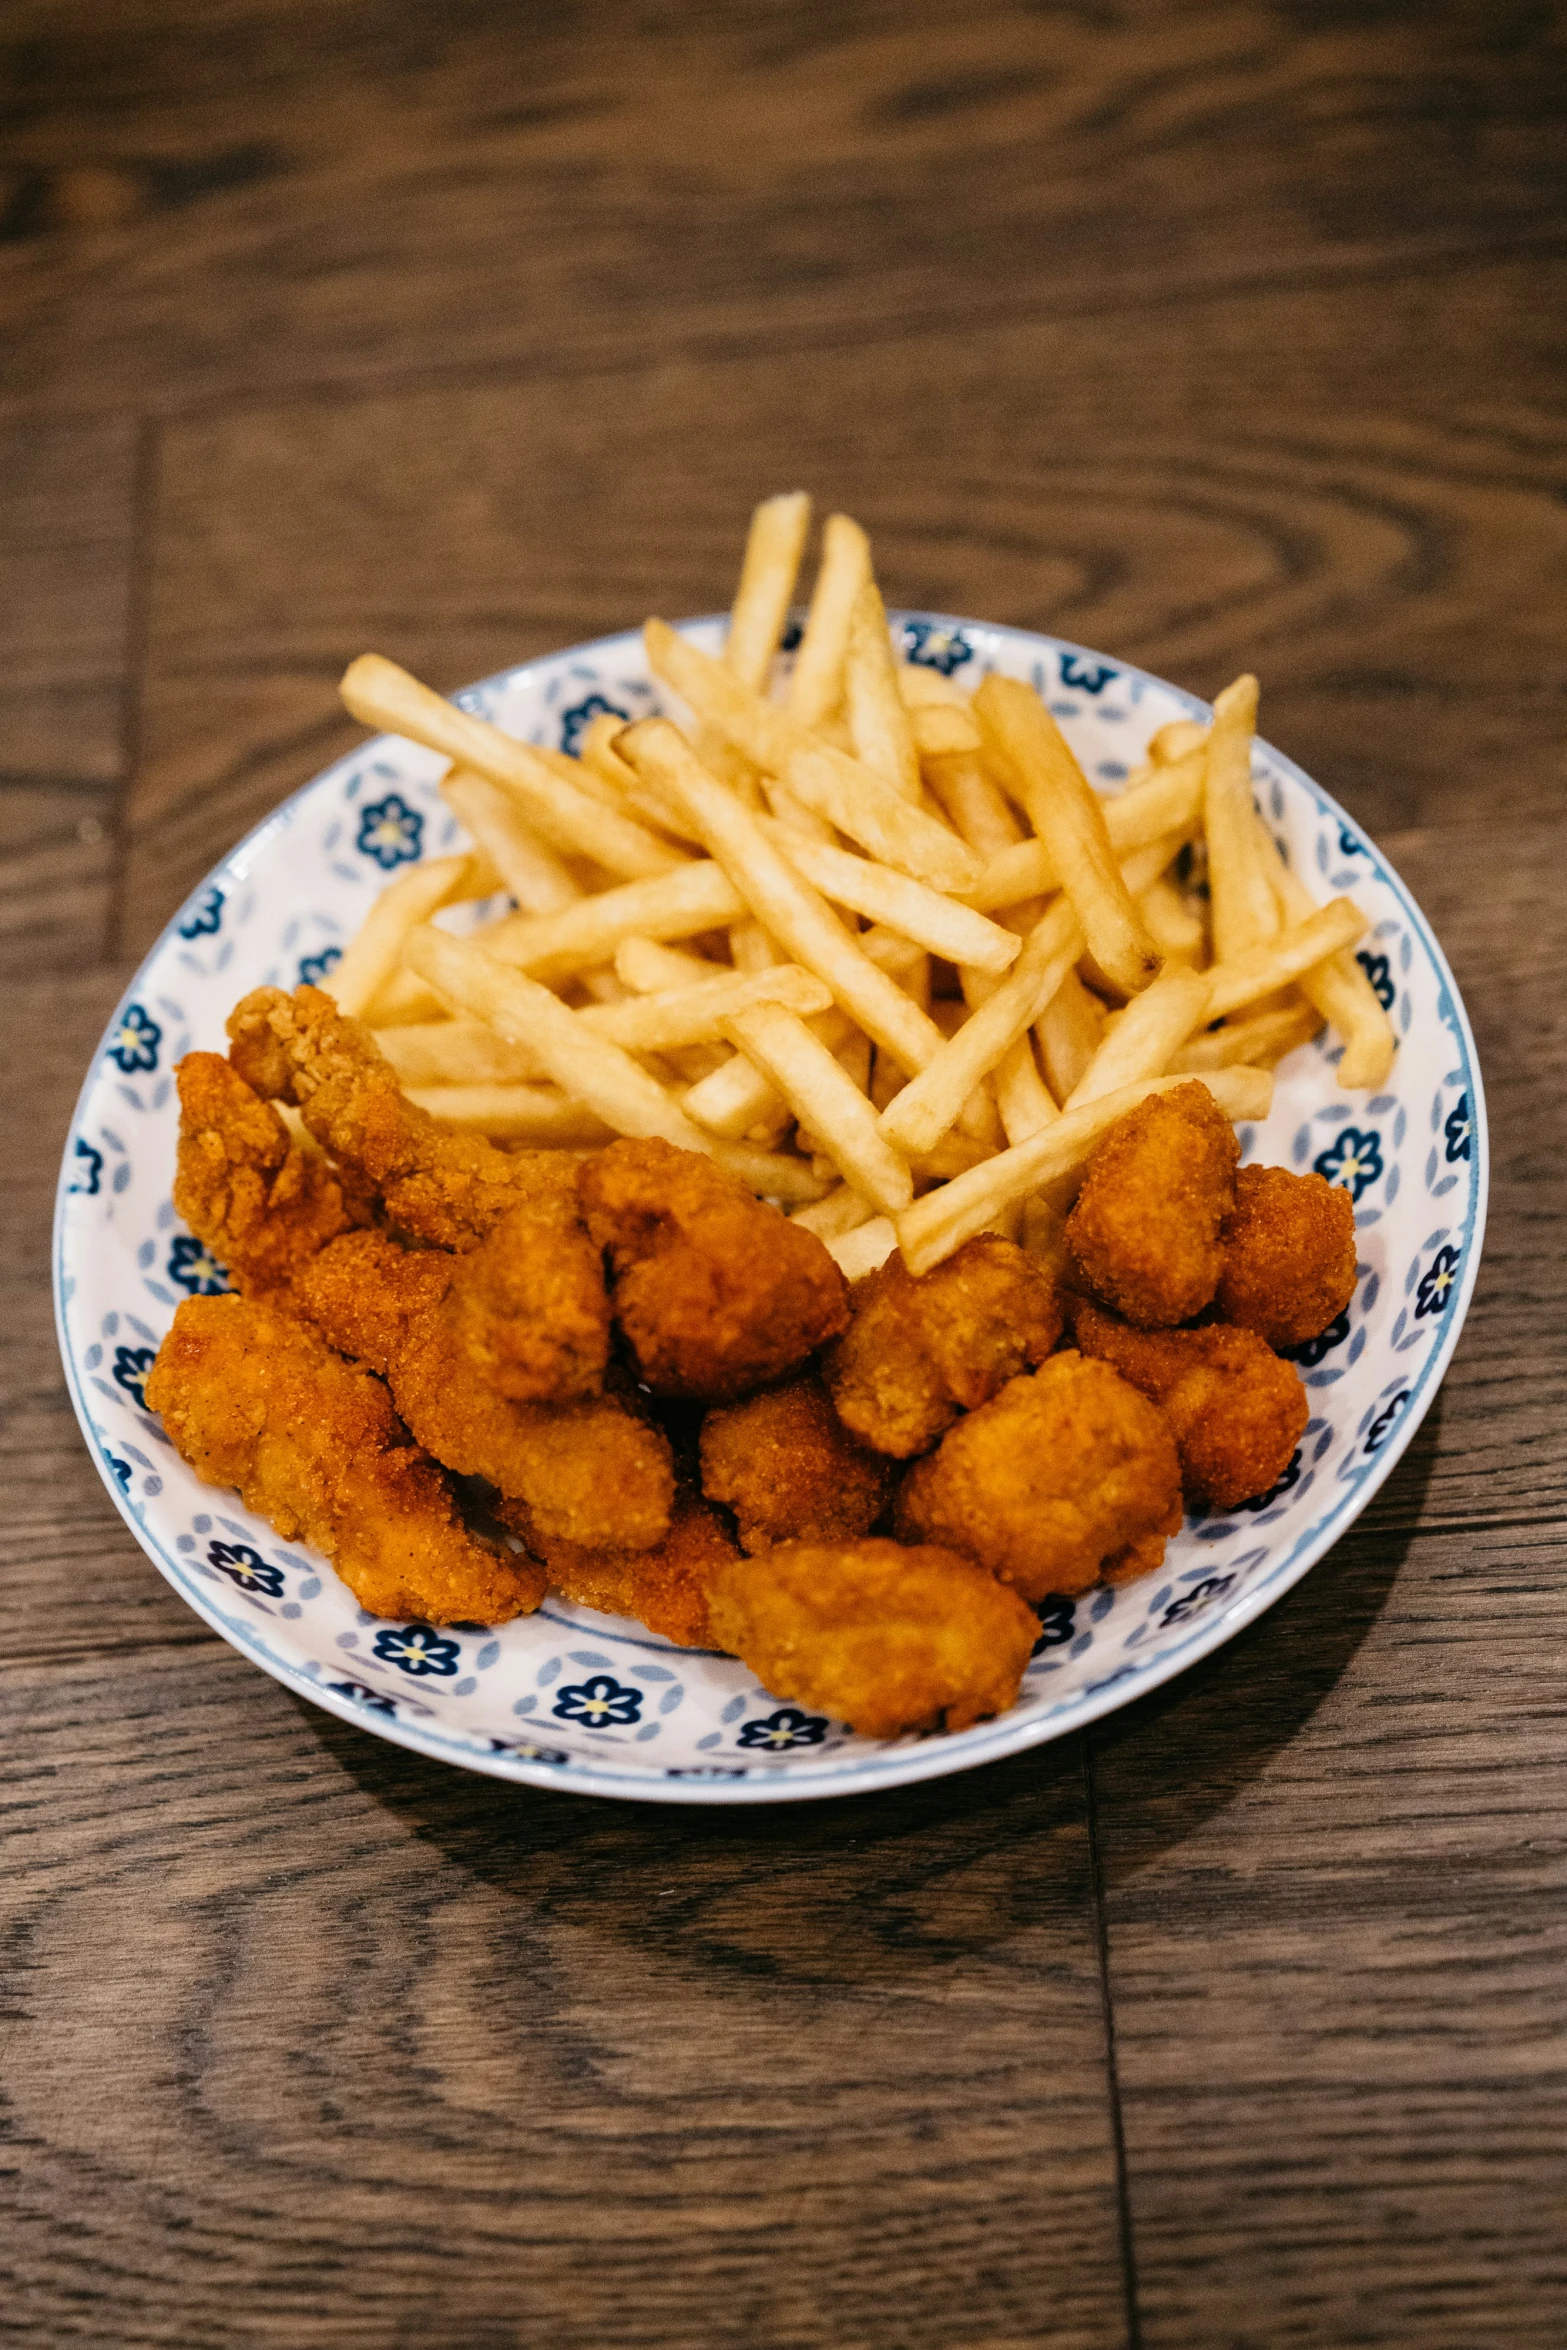 the chicken sticks are on the plate, and fries are on the plate